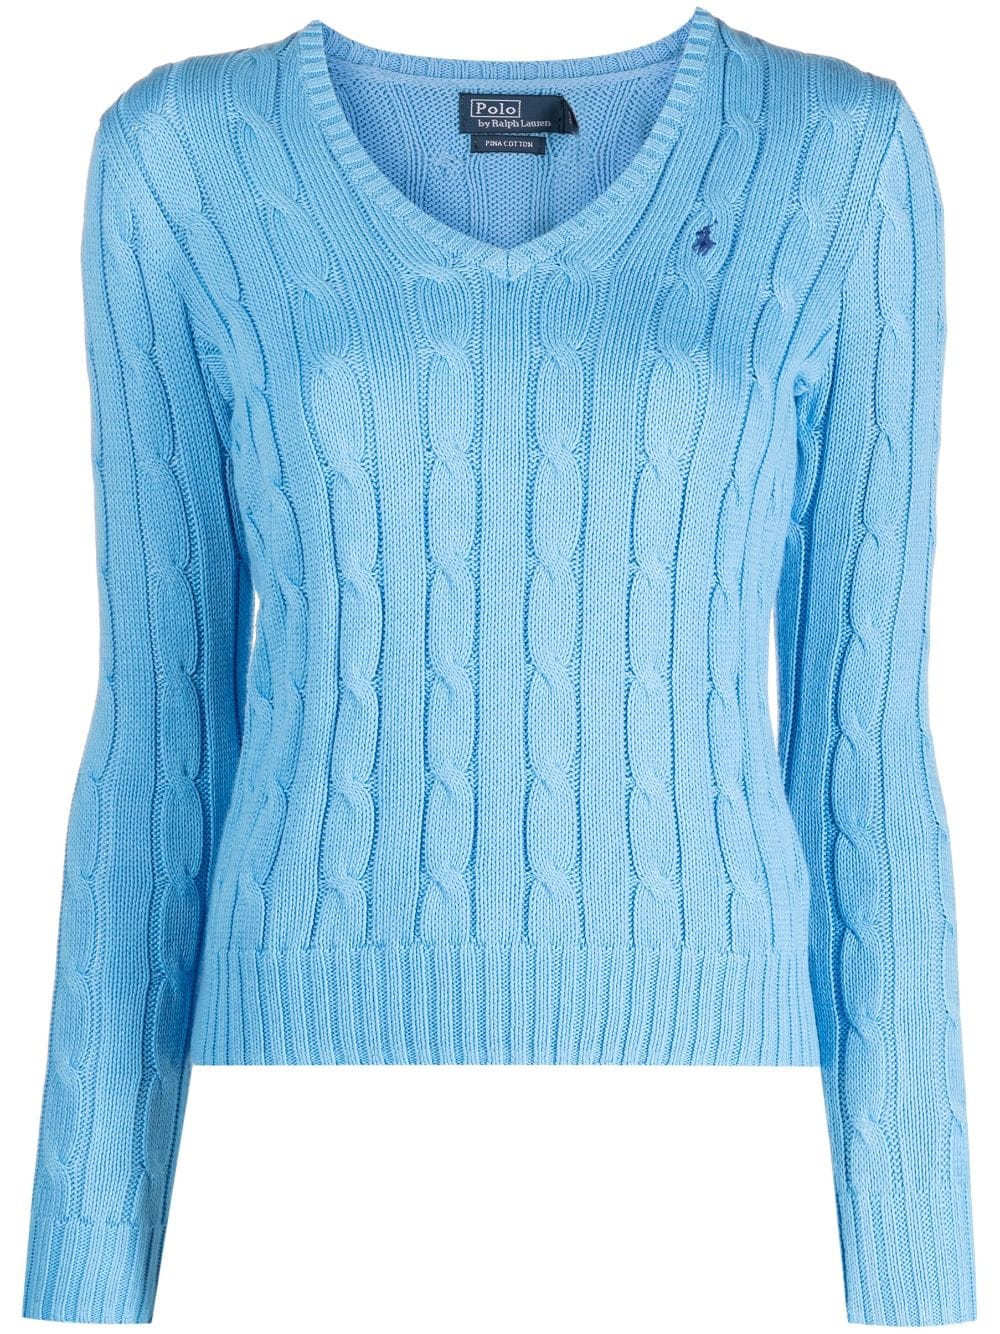 Polo Ralph Lauren Kimberly Polo Pony cable-knit Jumper - Farfetch